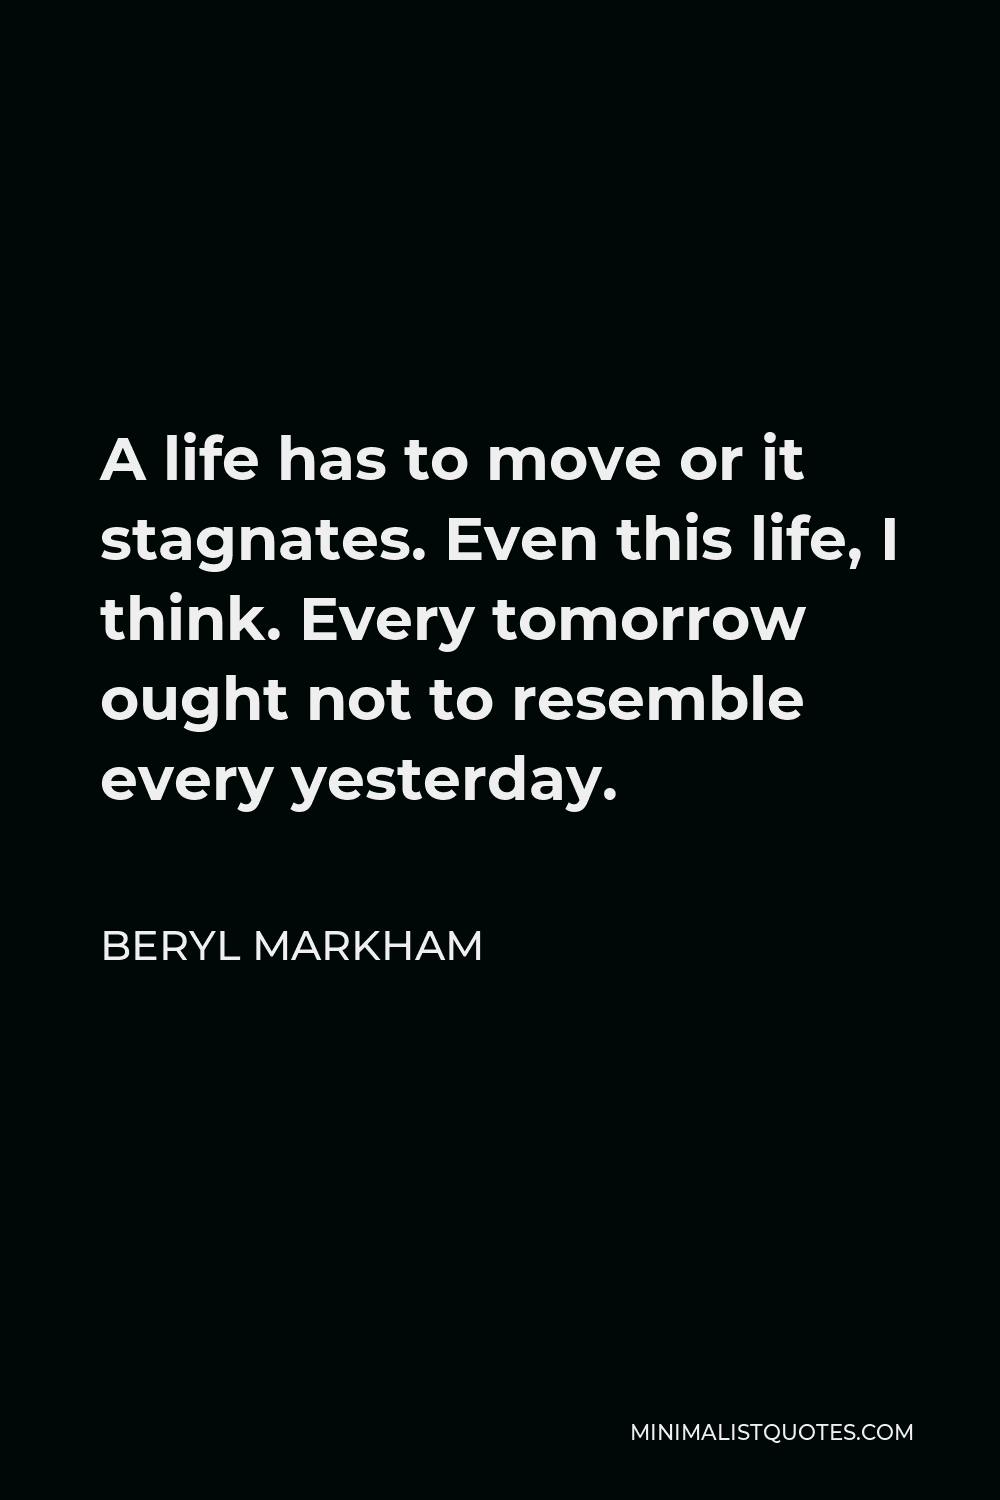 Beryl Markham Quote - A life has to move or it stagnates. Even this life, I think. Every tomorrow ought not to resemble every yesterday.